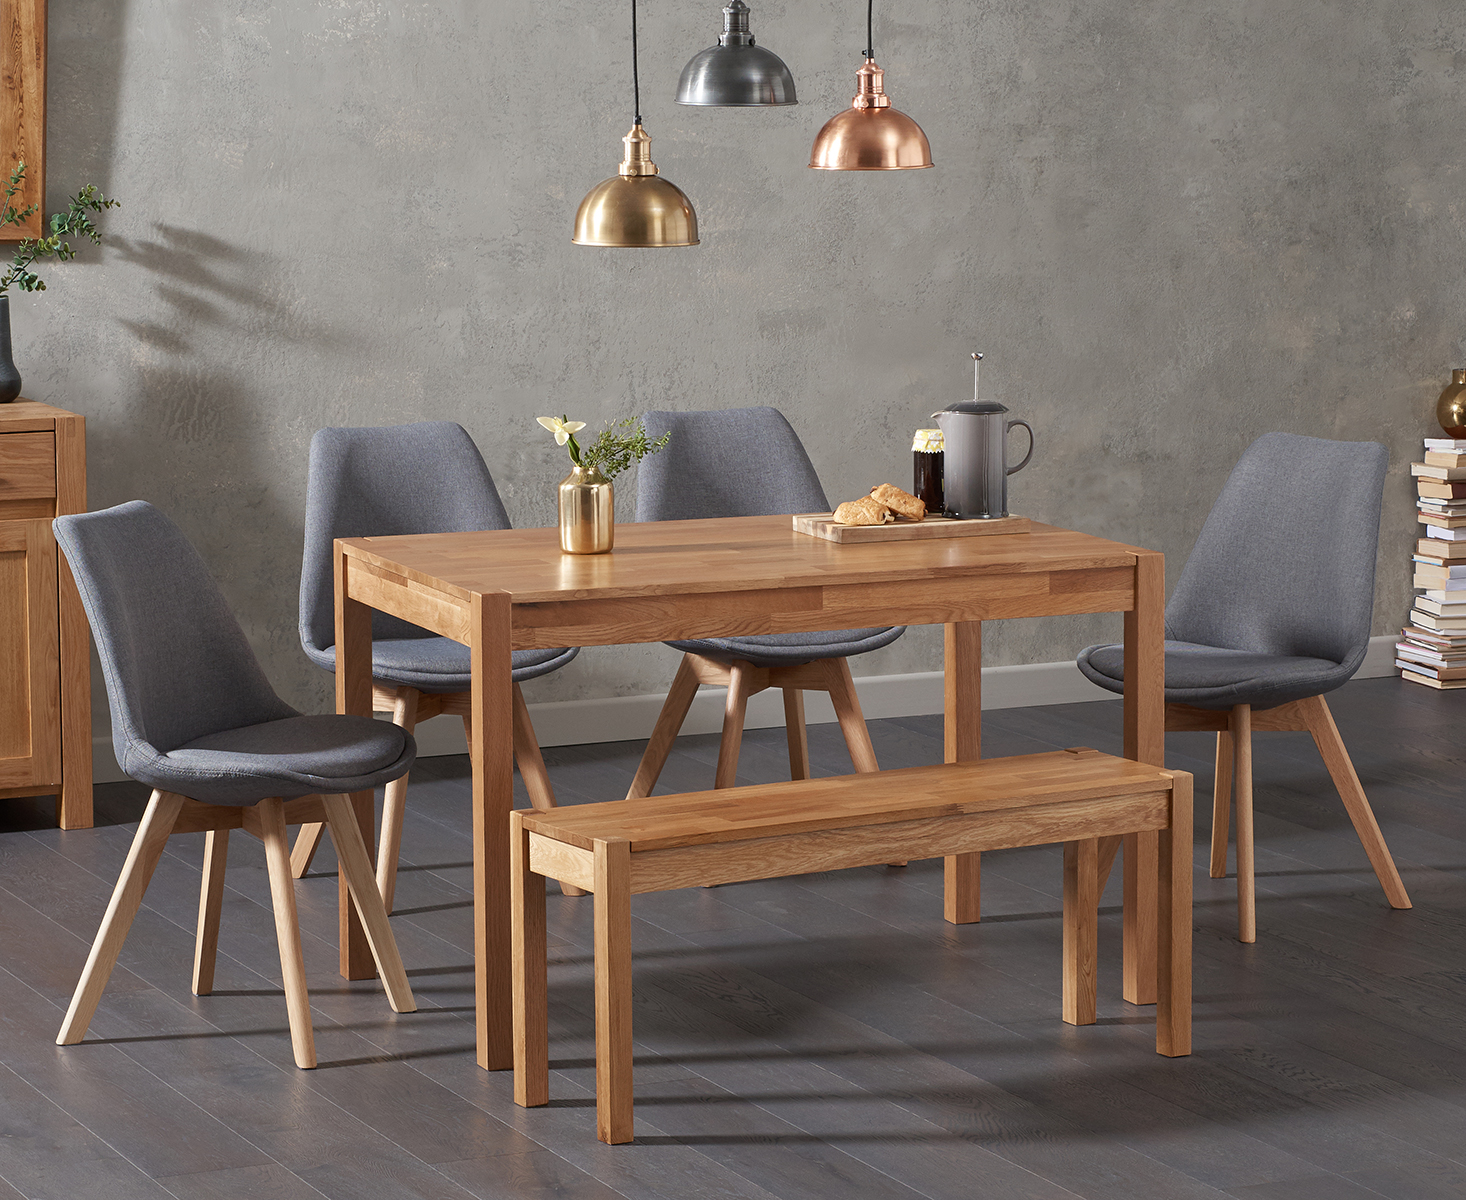 Oxford 120cm Solid Oak Dining Table With Orson Fabric Chairs And Oxford Bench